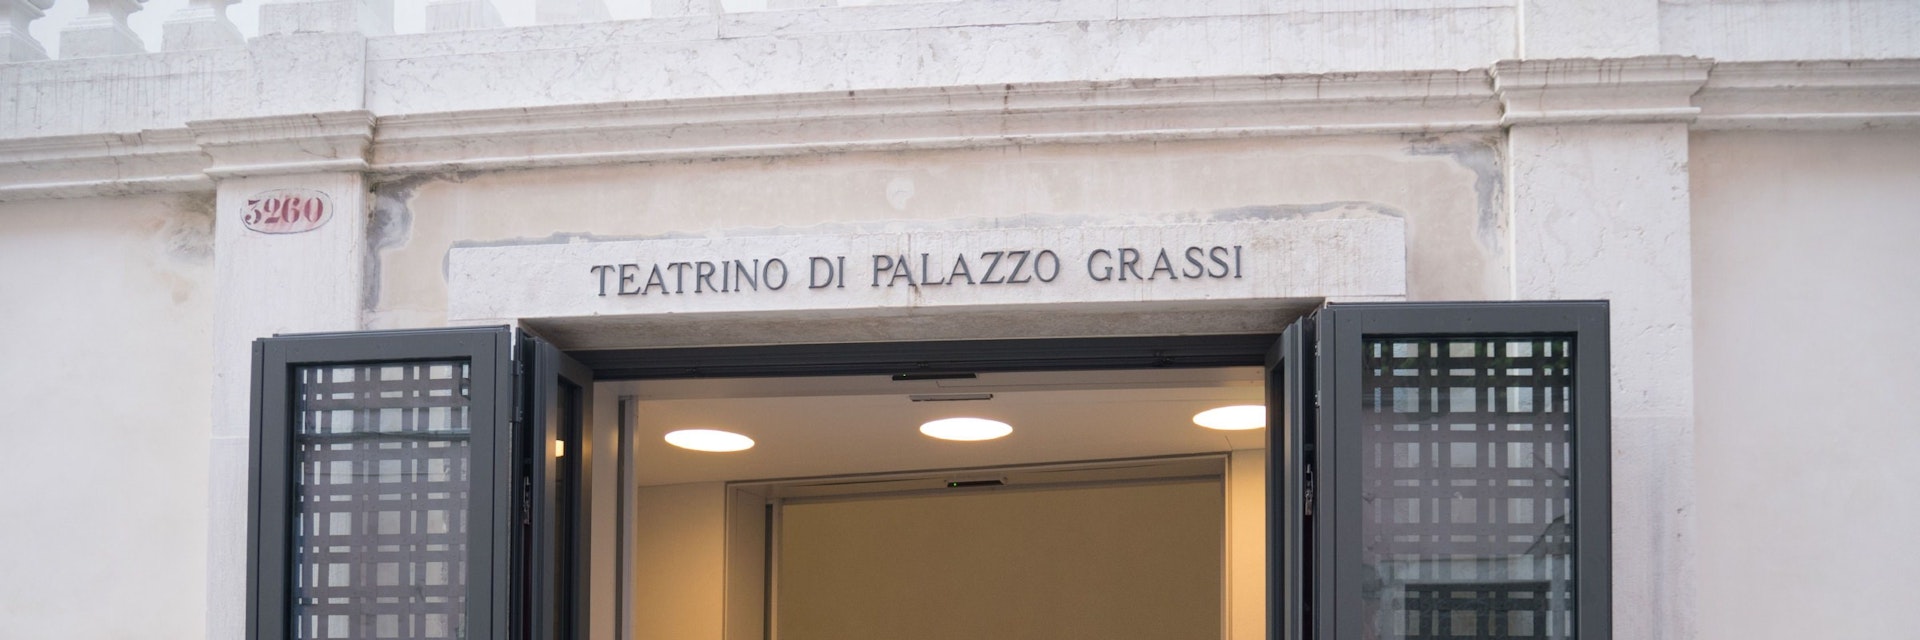 The gated entrance designed by Tadao Ando to the Teatrino Palazzo Grassi